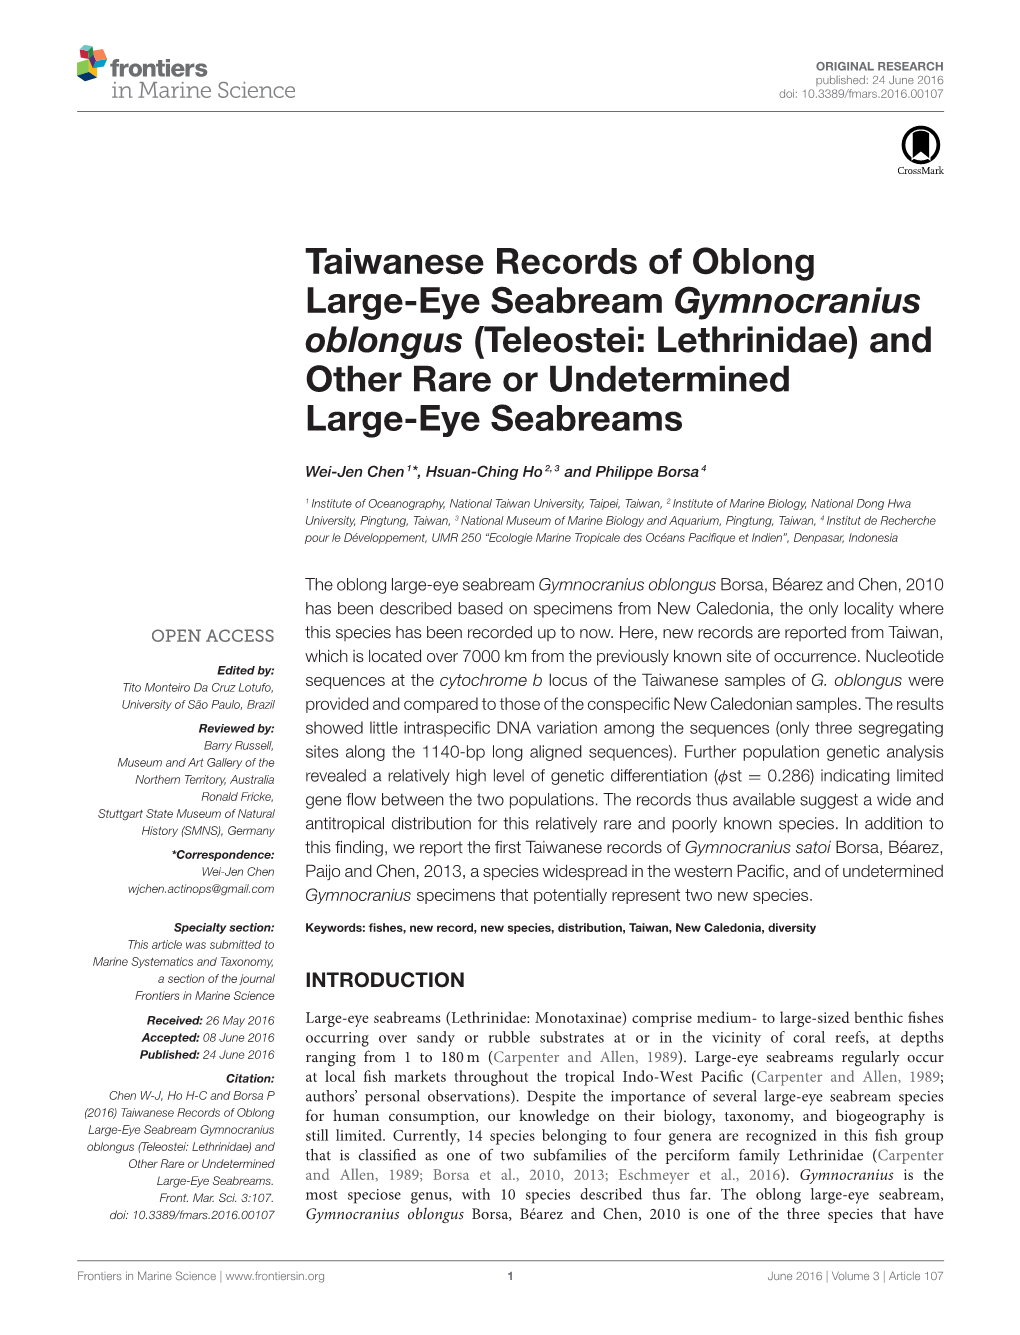 Taiwanese Records of Oblong Large-Eye Seabream Gymnocranius Oblongus (Teleostei: Lethrinidae) and Other Rare Or Undetermined Large-Eye Seabreams